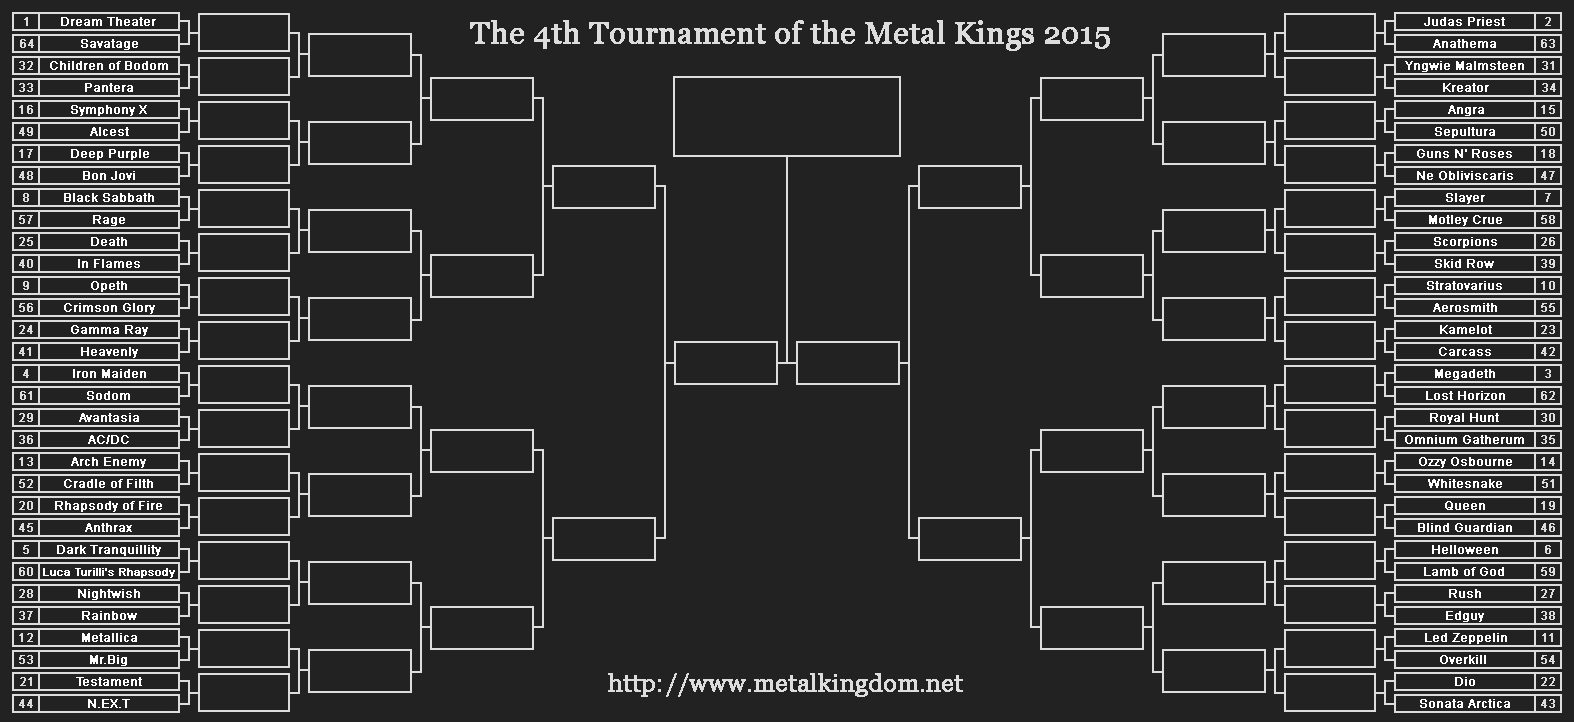 Tournament of the Metal Kings 2015 - Round of 64